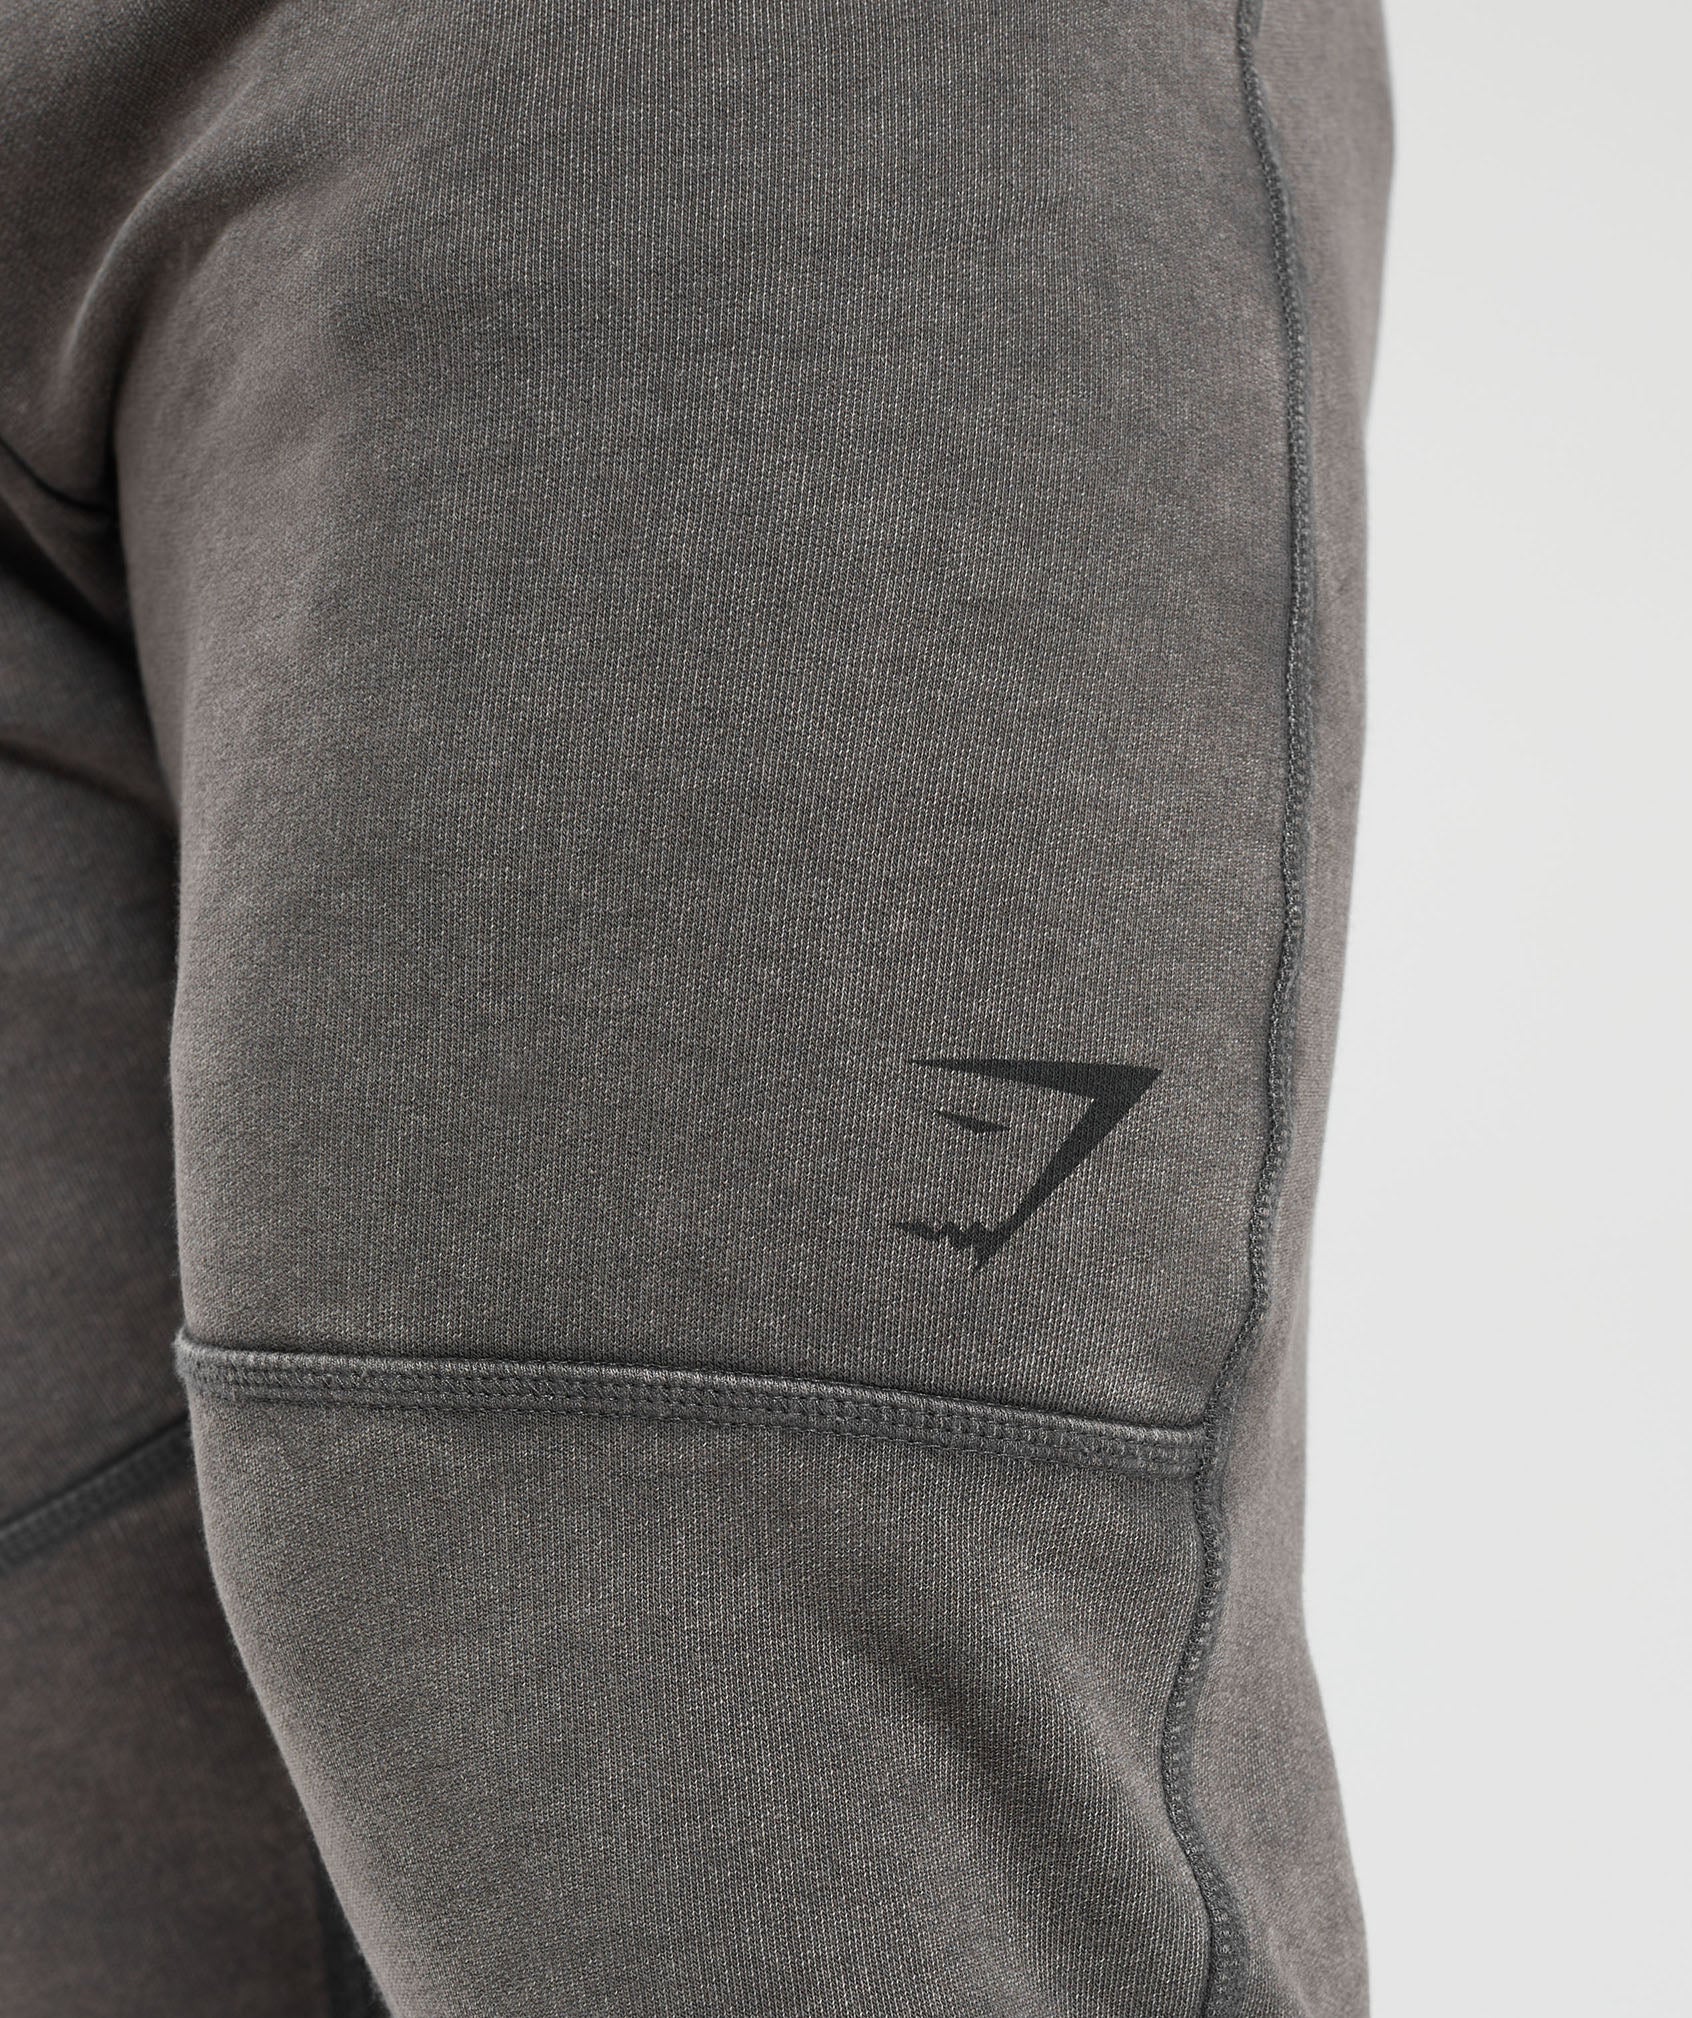 Heritage Joggers in Onyx Grey - view 6